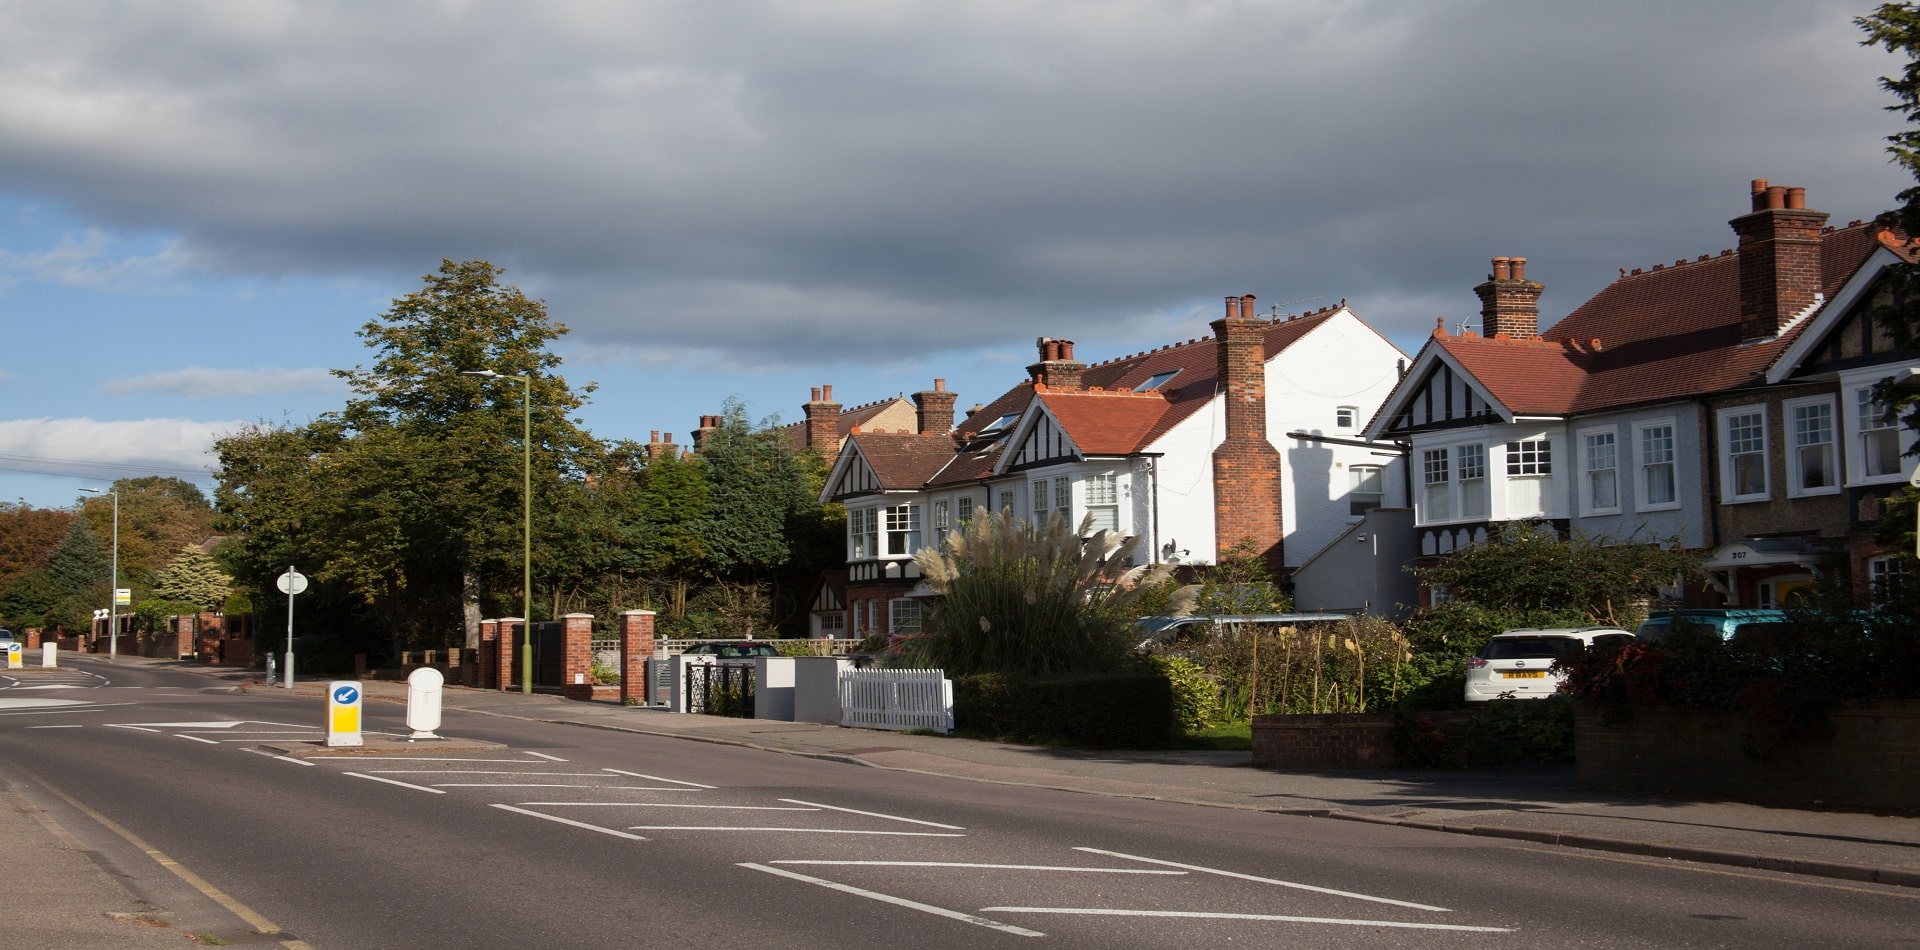 Houses in Potters Bar, Hertfordshire in the UK